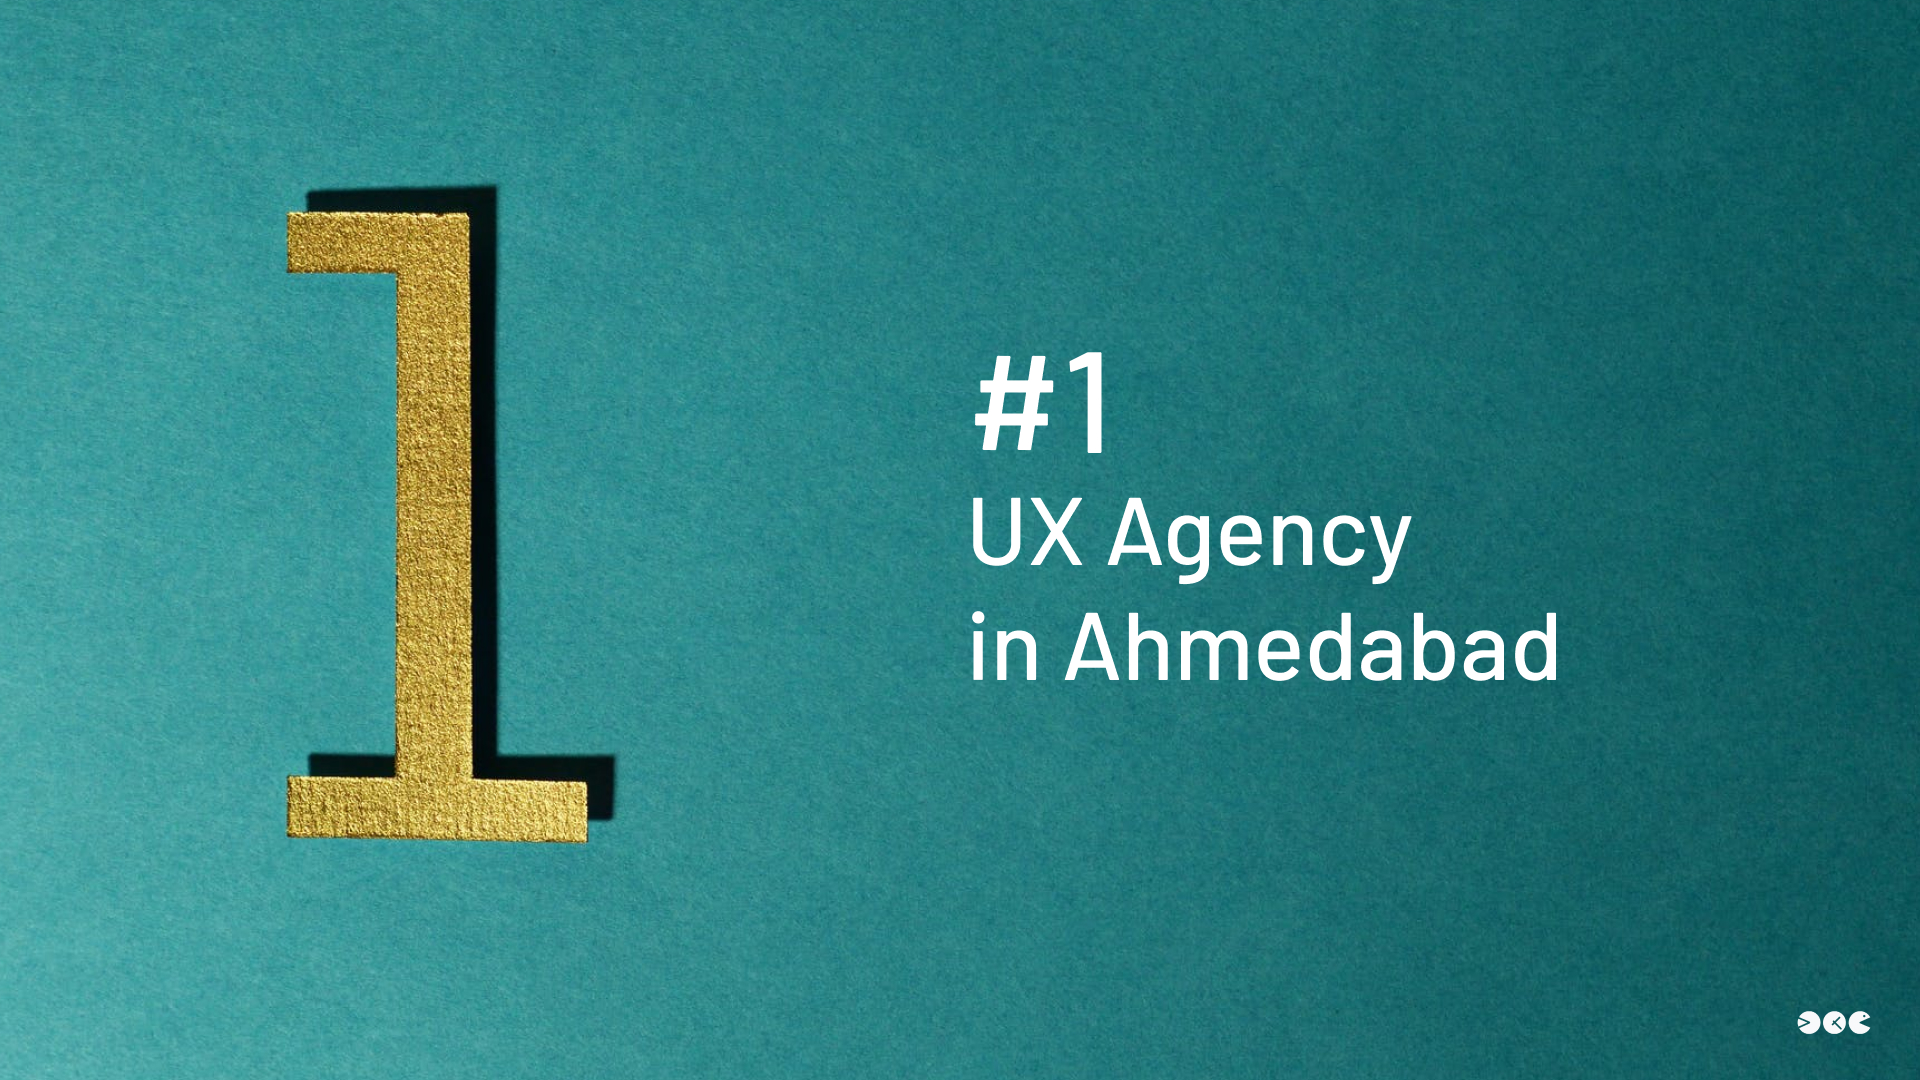 Aubergine Solutions is the 1 UX Agency in Ahmedabad